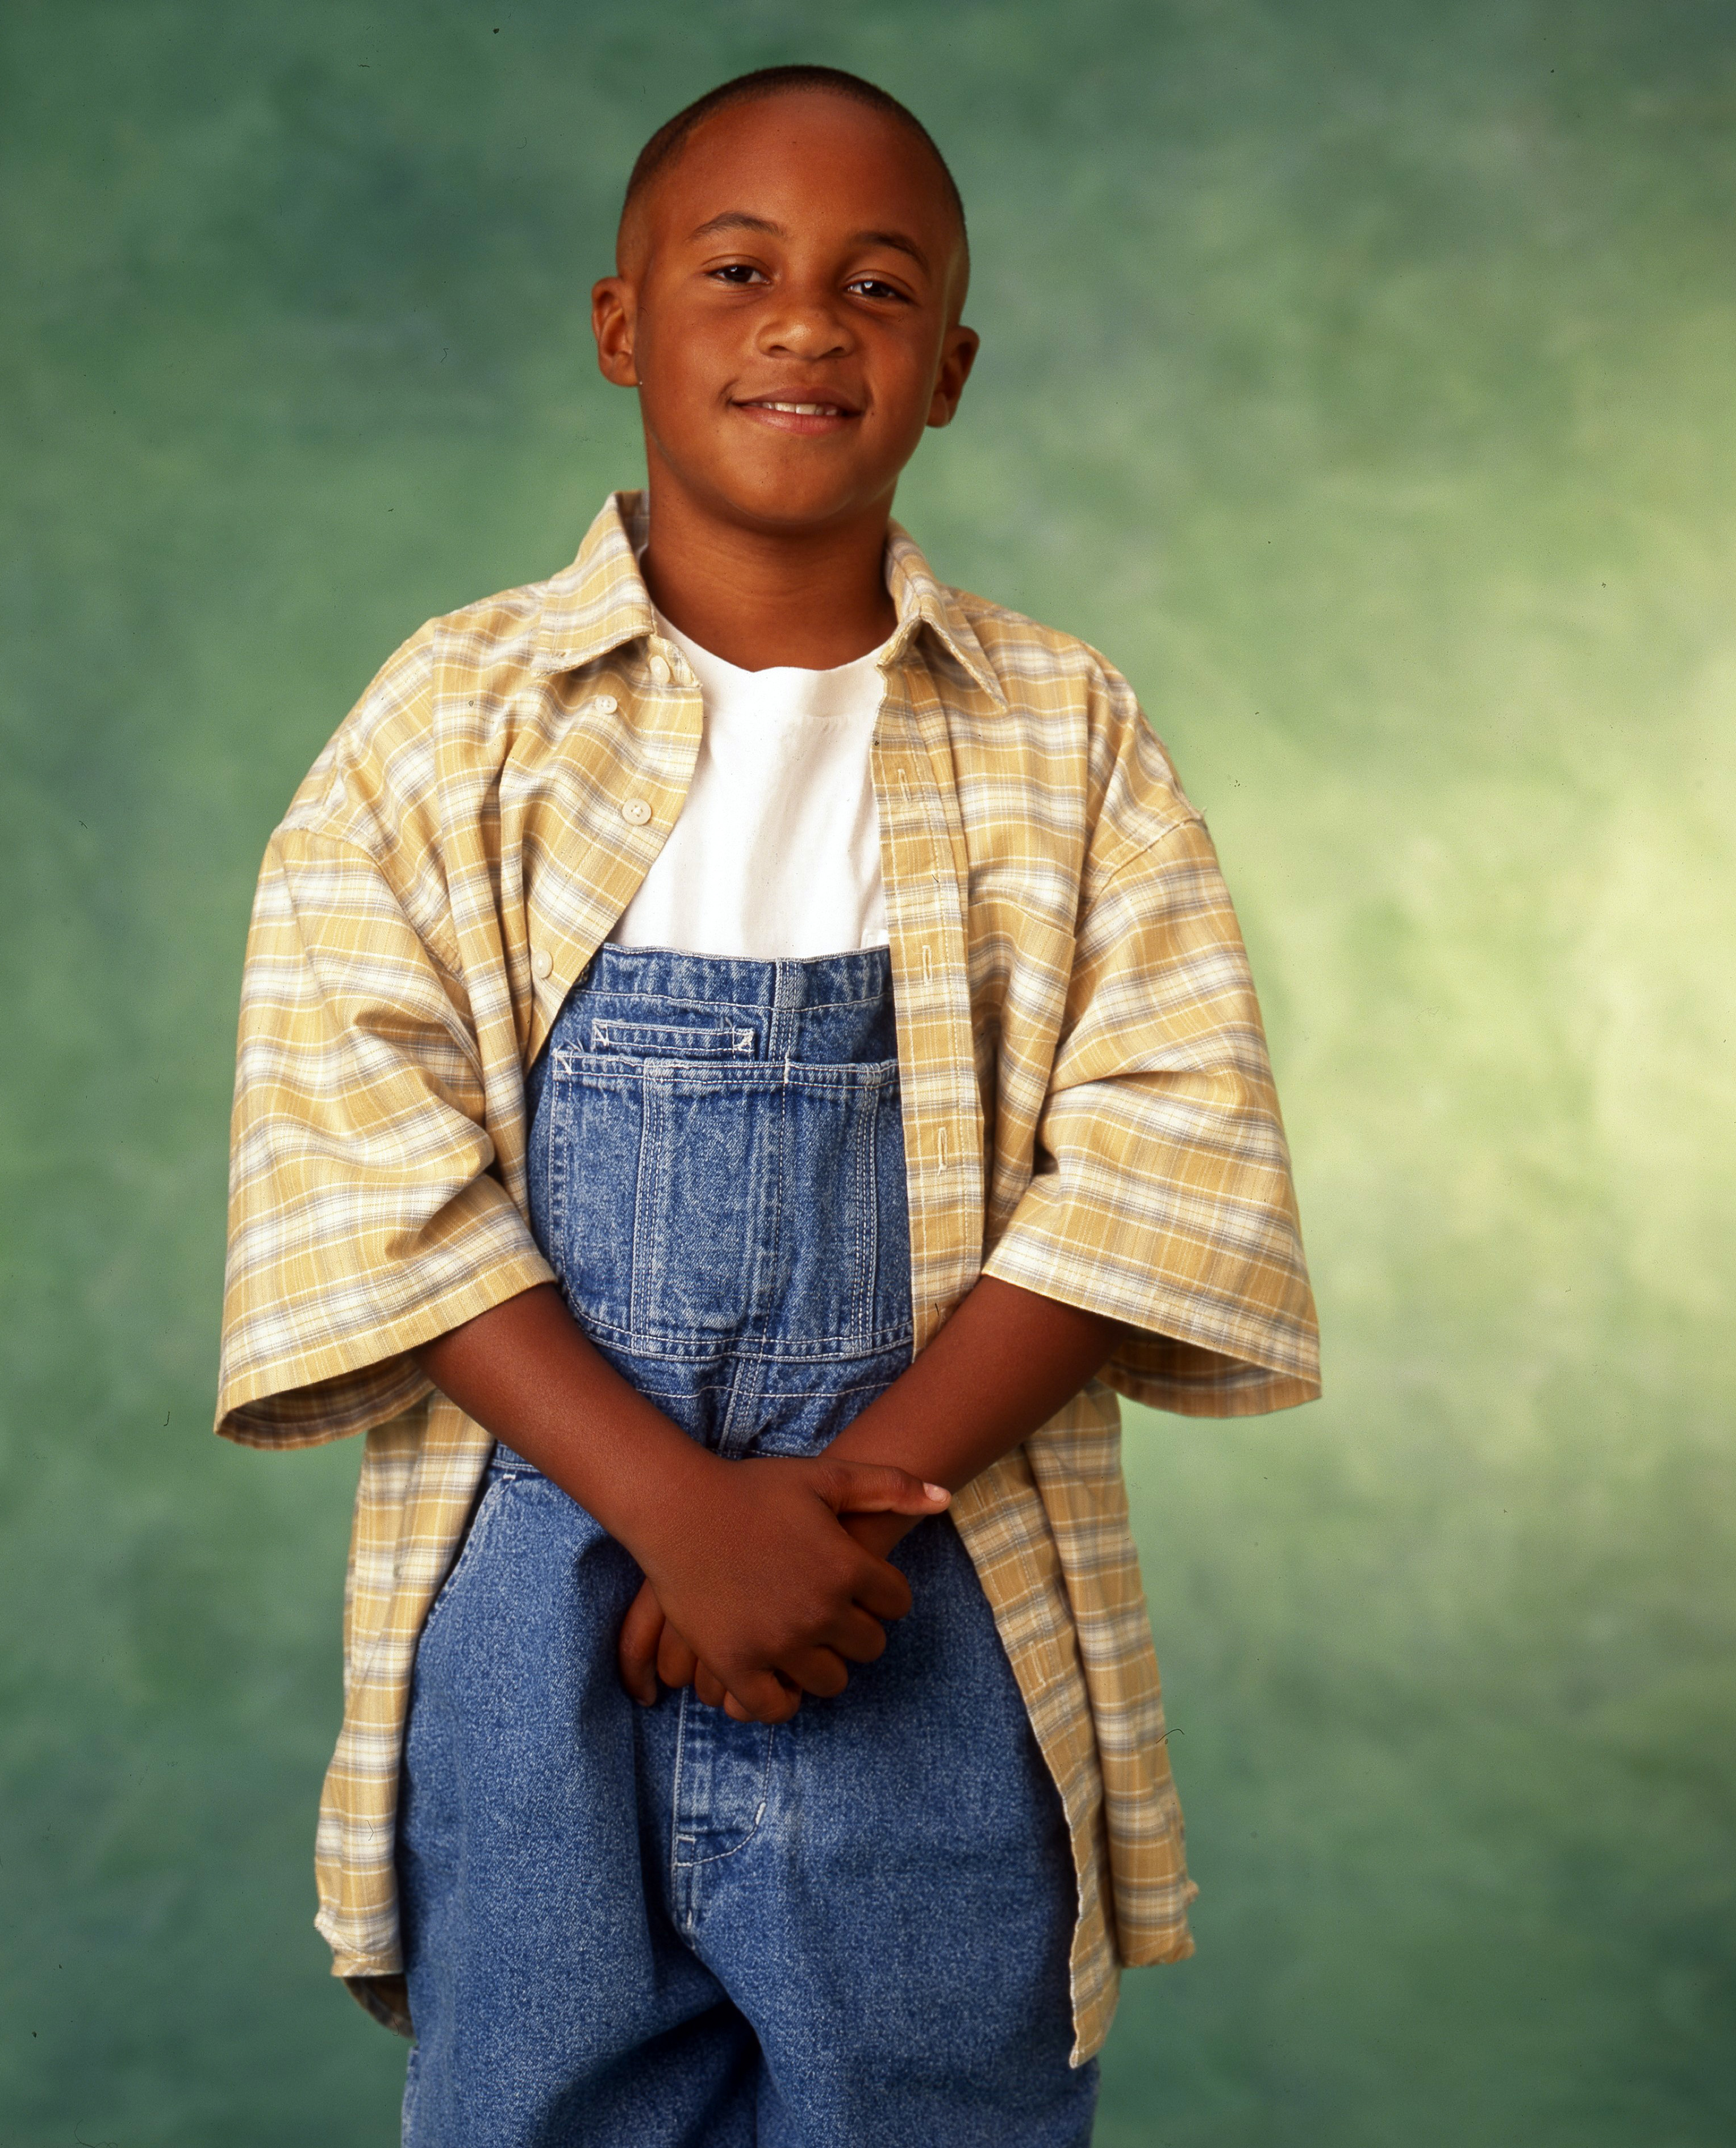 Orlando Brown for "Family Matters," circa 1996 | Source: Getty Images